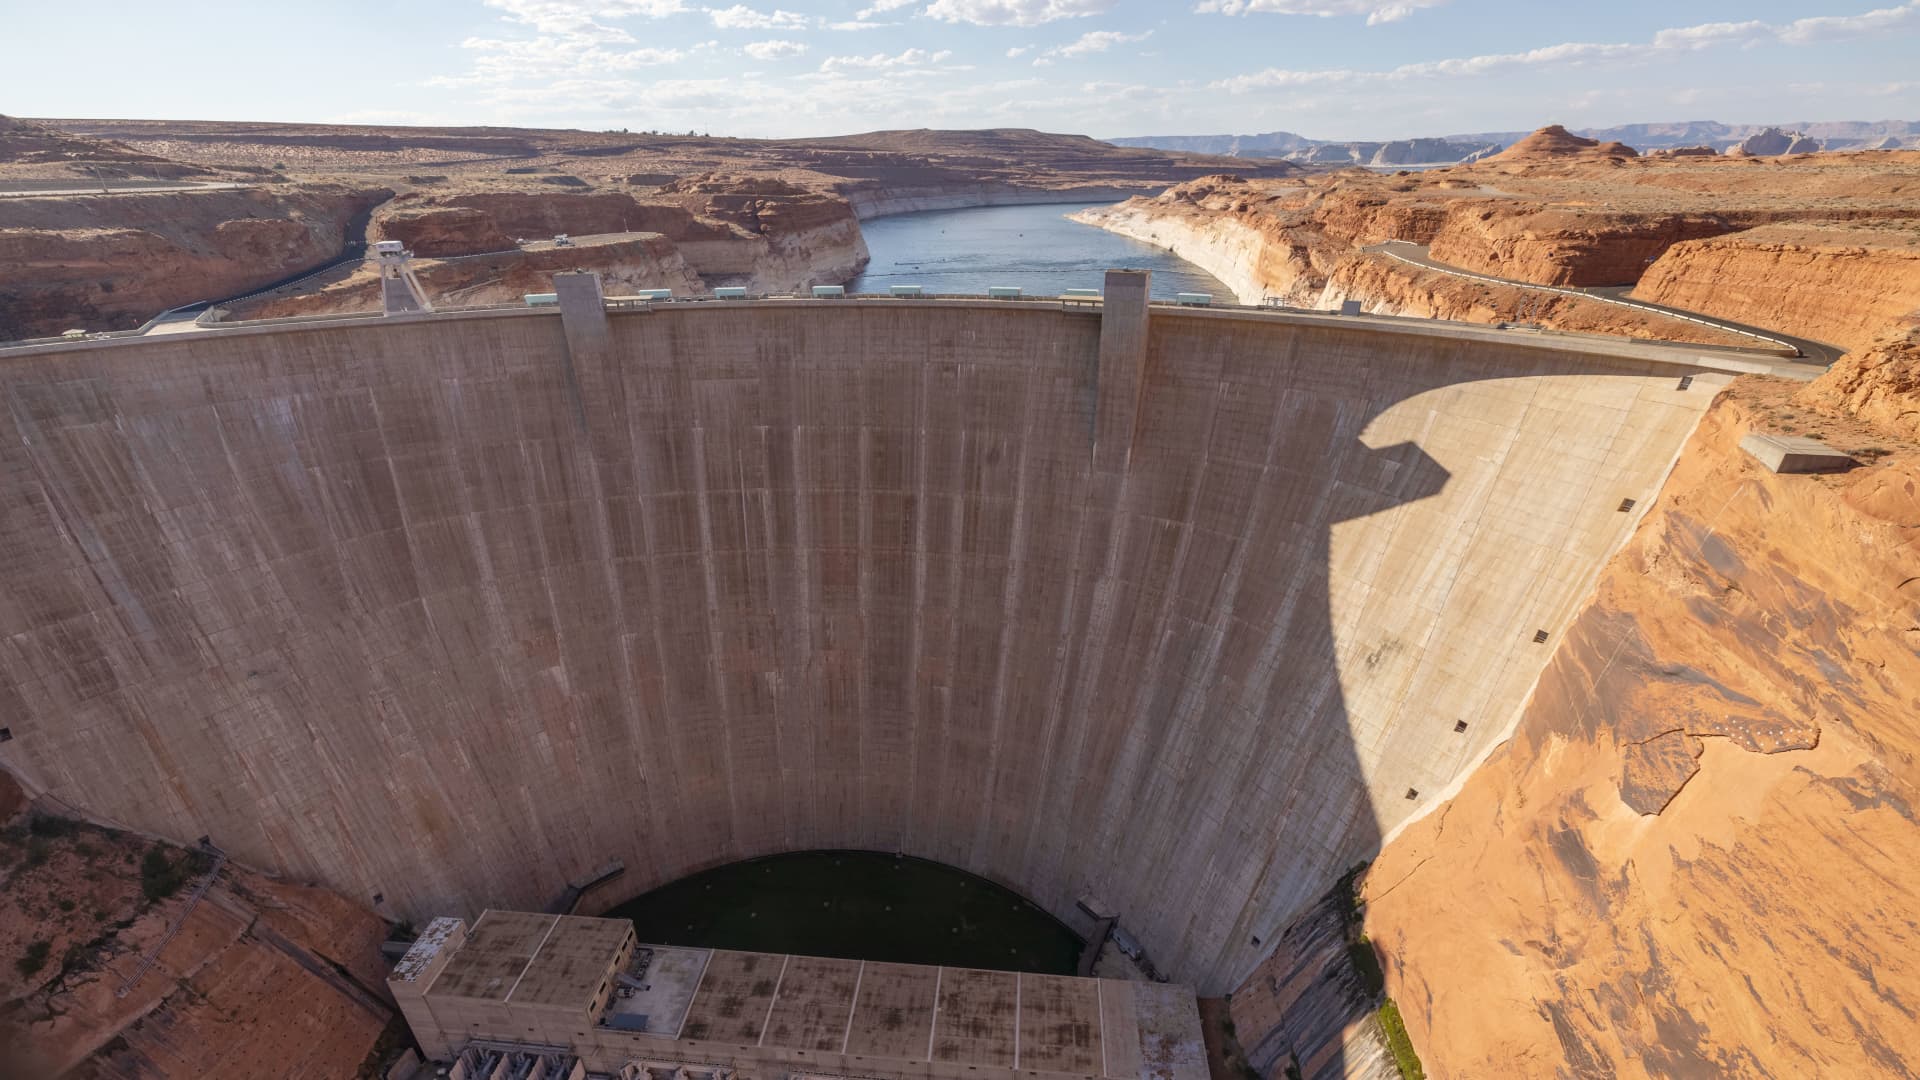 Glen Canyon Dam is seen, behind which are record low water levels at Lake Powell, as the drought continues to worsen on July 2, 2021 near Page, Arizona.